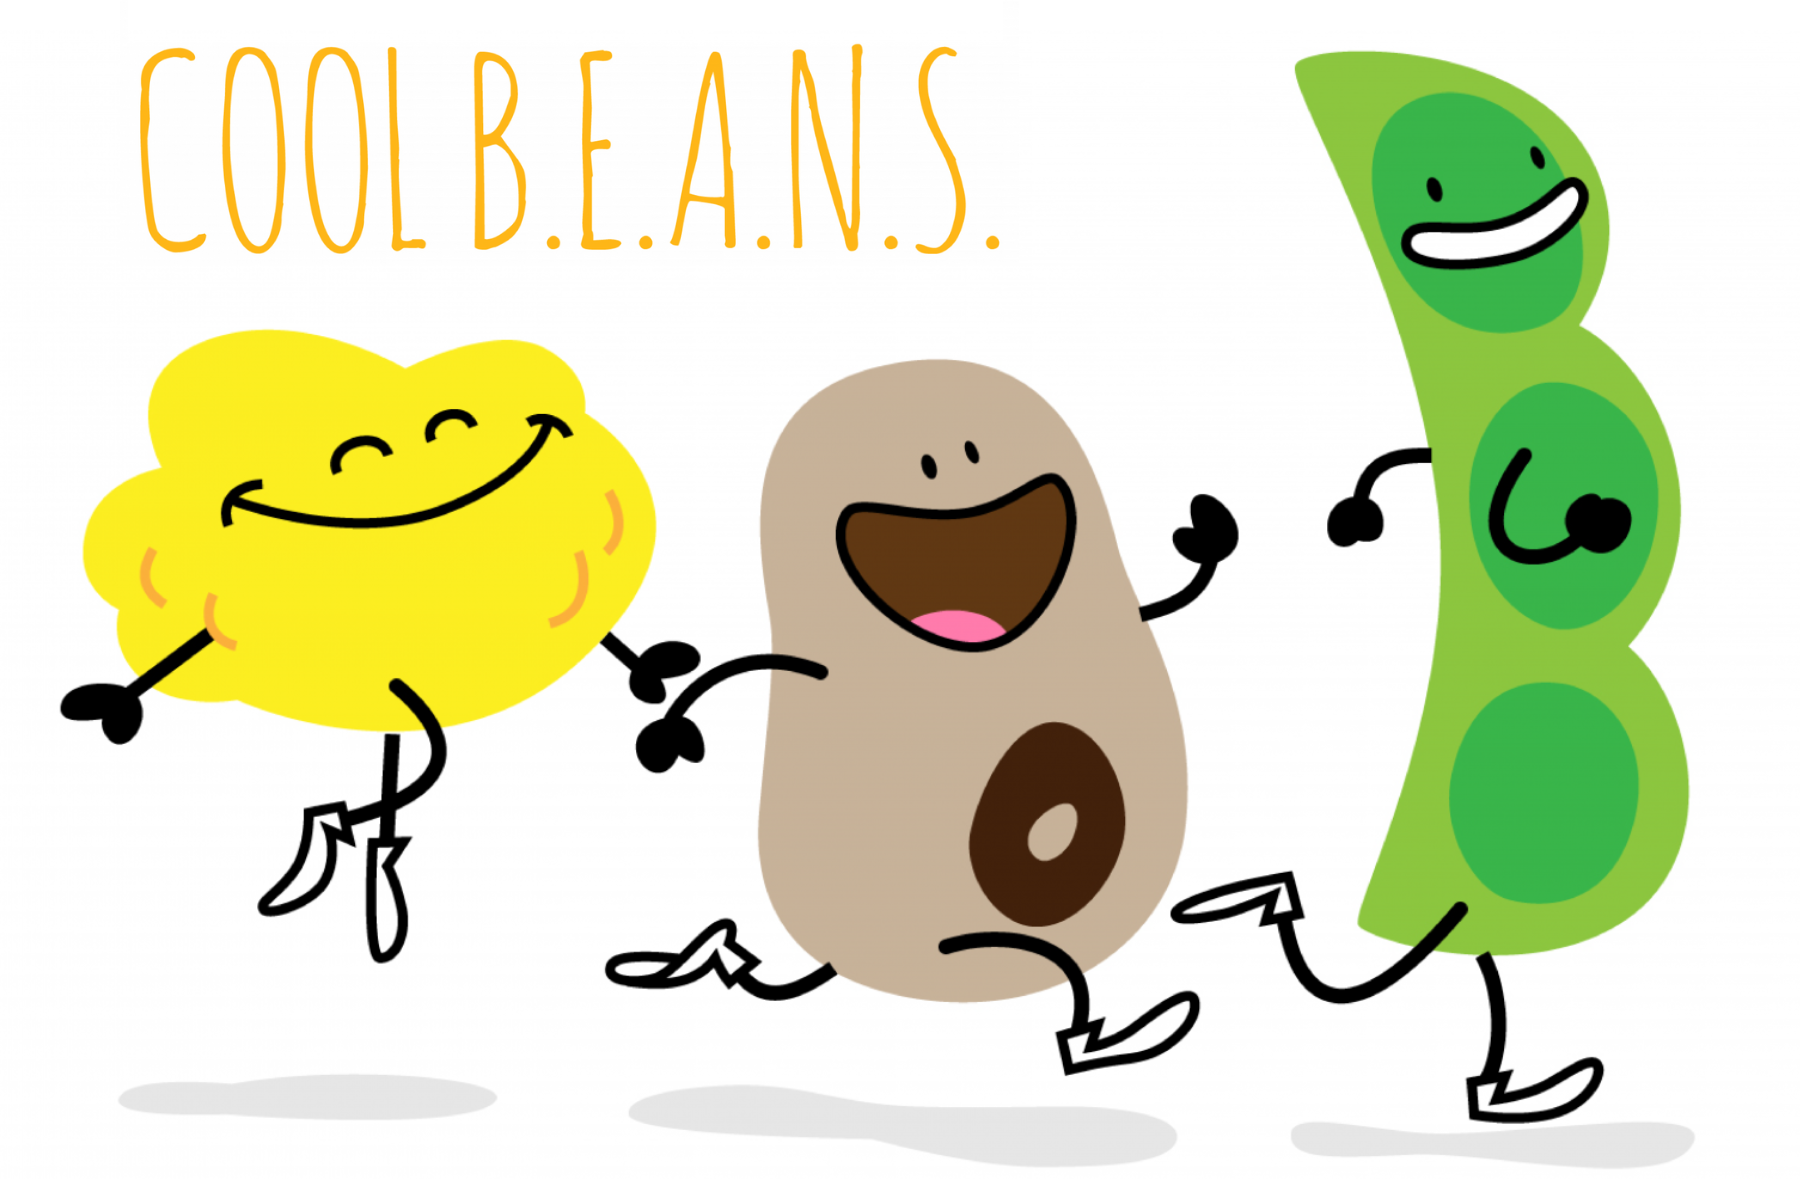 illustration of beans running promoting cool beans